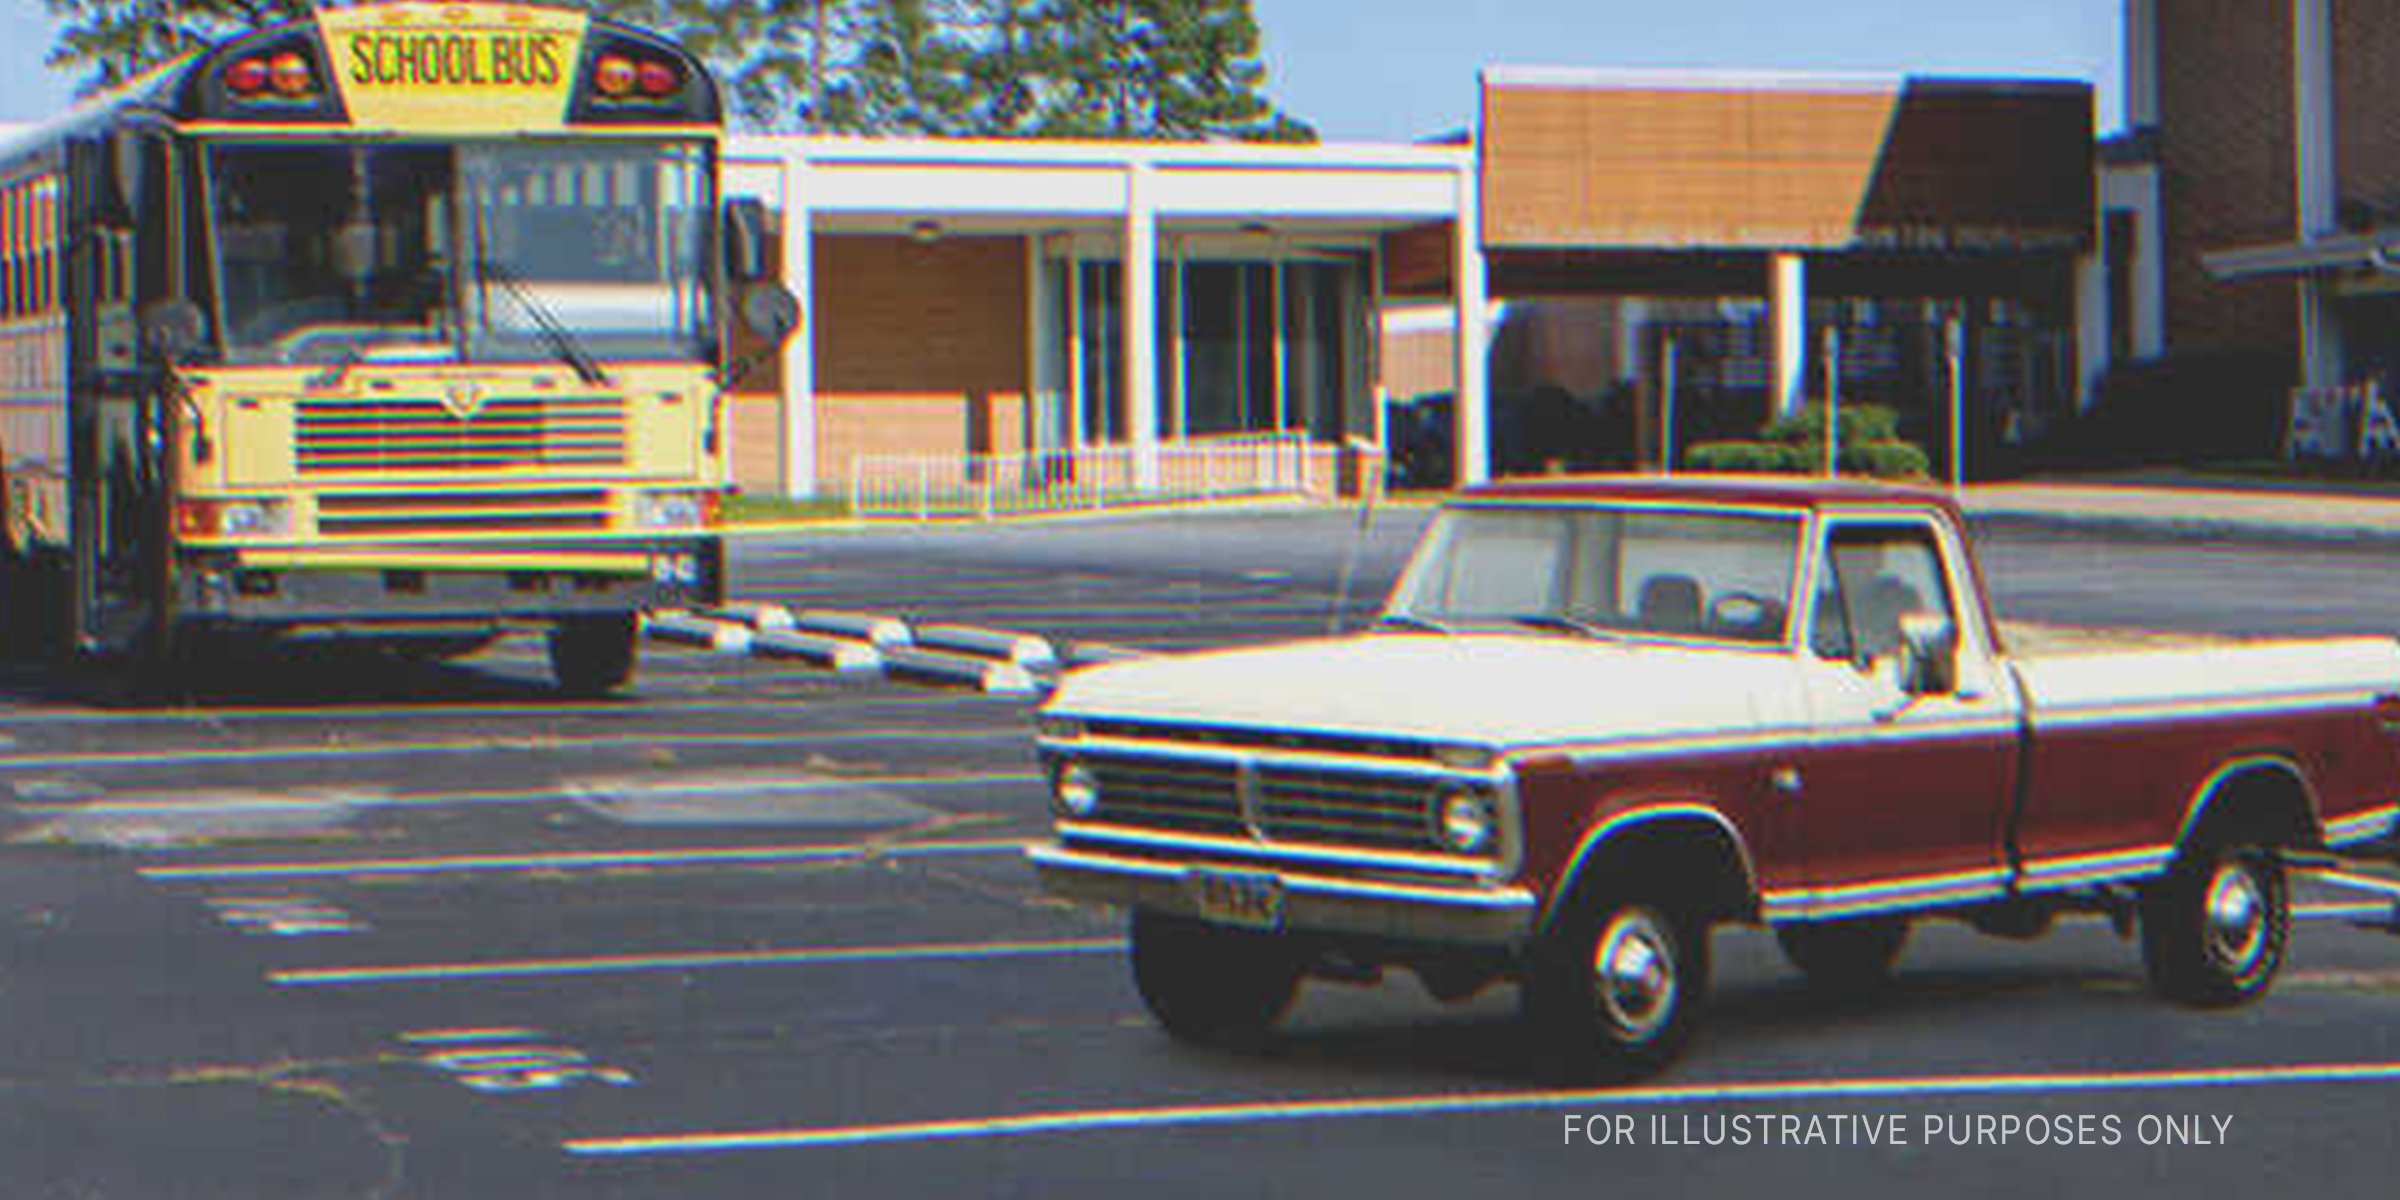 Old pickup truck in school parking lot | Source: Flickr / Alabama Extension (Public Domain) Flickr / Crown Star Images (CC BY 2.0)